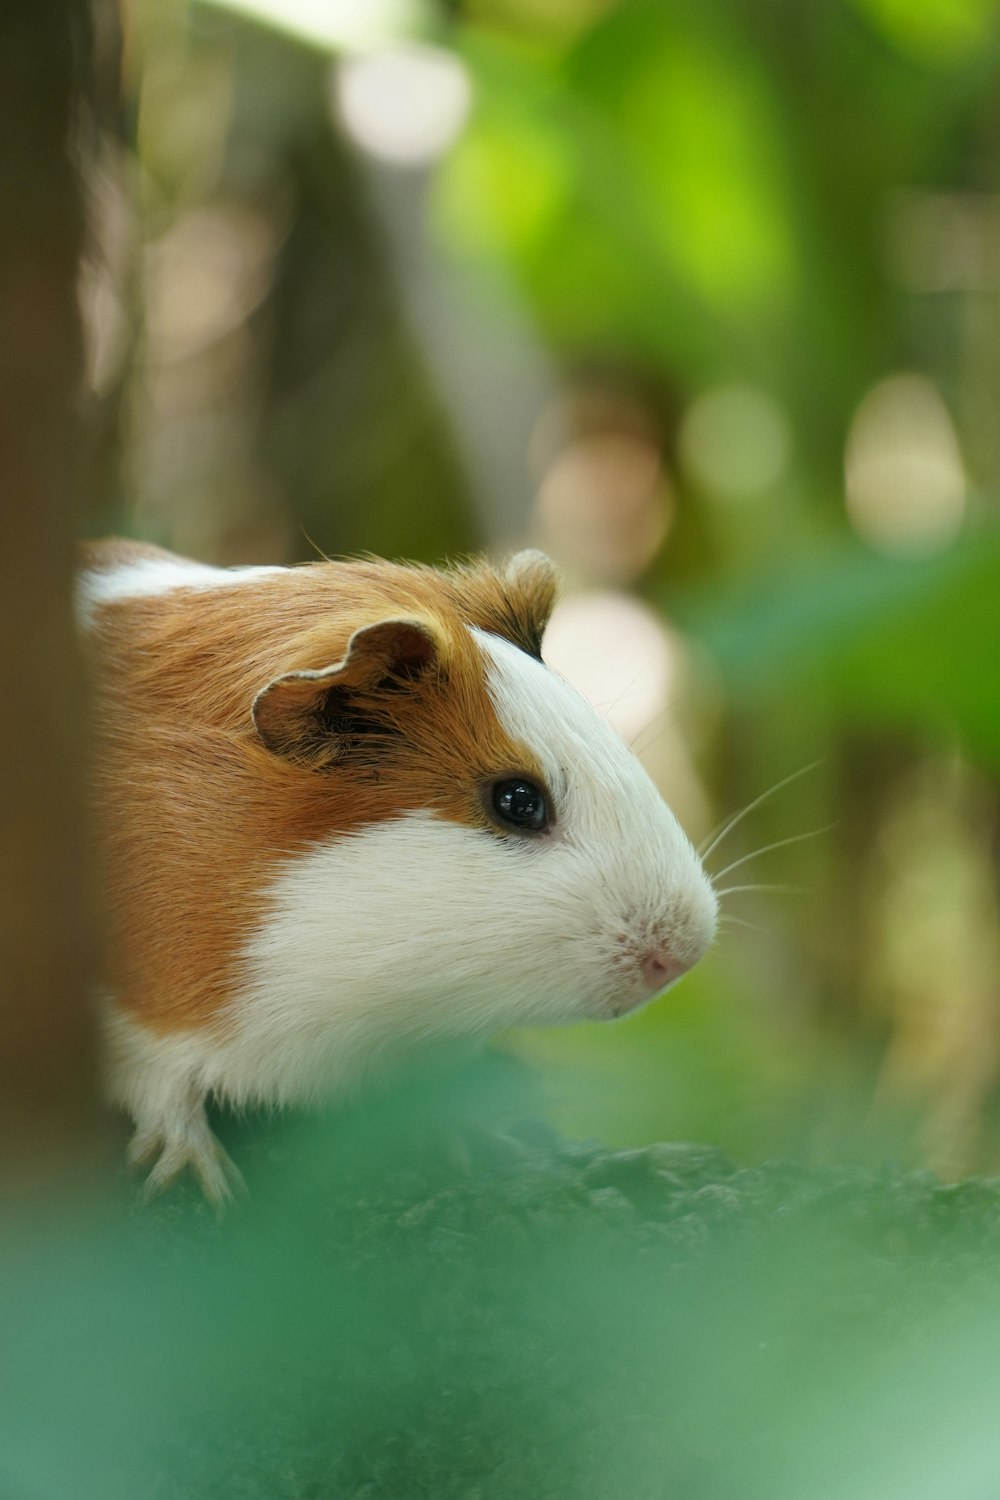 white and brown guinea pig on green surface